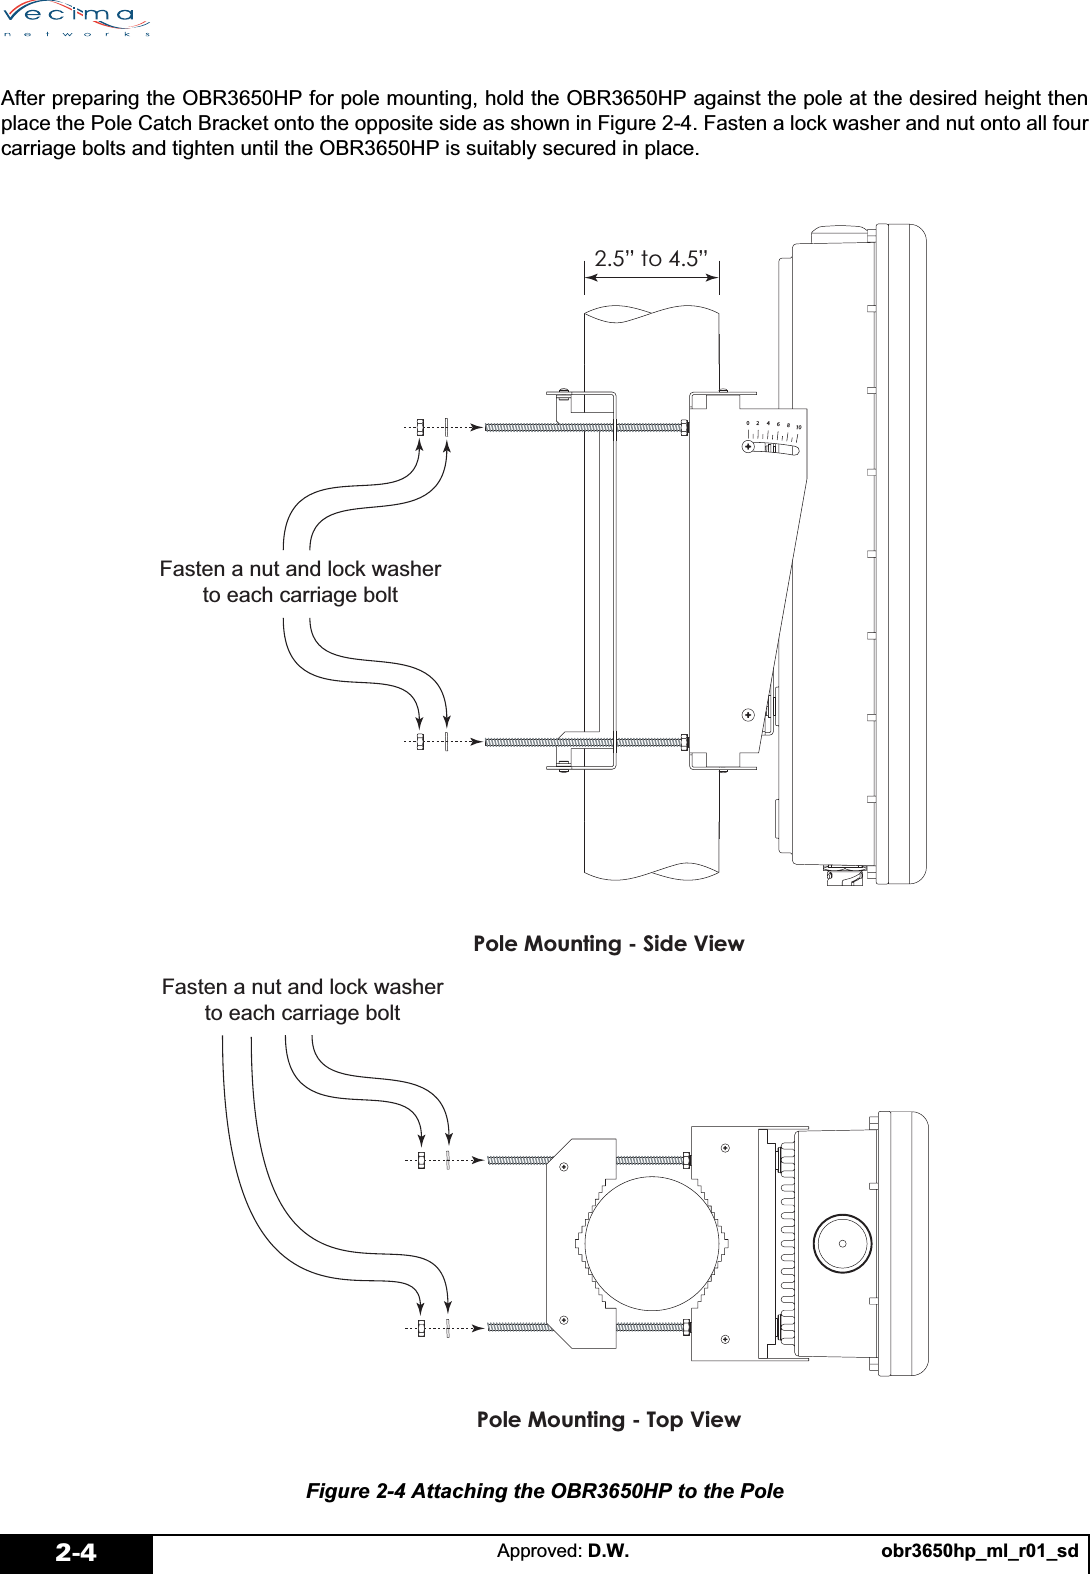 obr3650hp_ml_r01_sdApproved: D.W.2-4After preparing the OBR3650HP for pole mounting, hold the OBR3650HP against the pole at the desired height thenplace the Pole Catch Bracket onto the opposite side as shown in Figure 2-4. Fasten a lock washer and nut onto all fourcarriage bolts and tighten until the OBR3650HP is suitably secured in place.Figure 2-4 Attaching the OBR3650HP to the Pole3ROH0RXQWLQJ6LGH9LHZ3ROH0RXQWLQJ7RS9LHZµWRµ)DVWHQDQXWDQGORFNZDVKHUWRHDFKFDUULDJHEROW)DVWHQDQXWDQGORFNZDVKHUWRHDFKFDUULDJHEROW